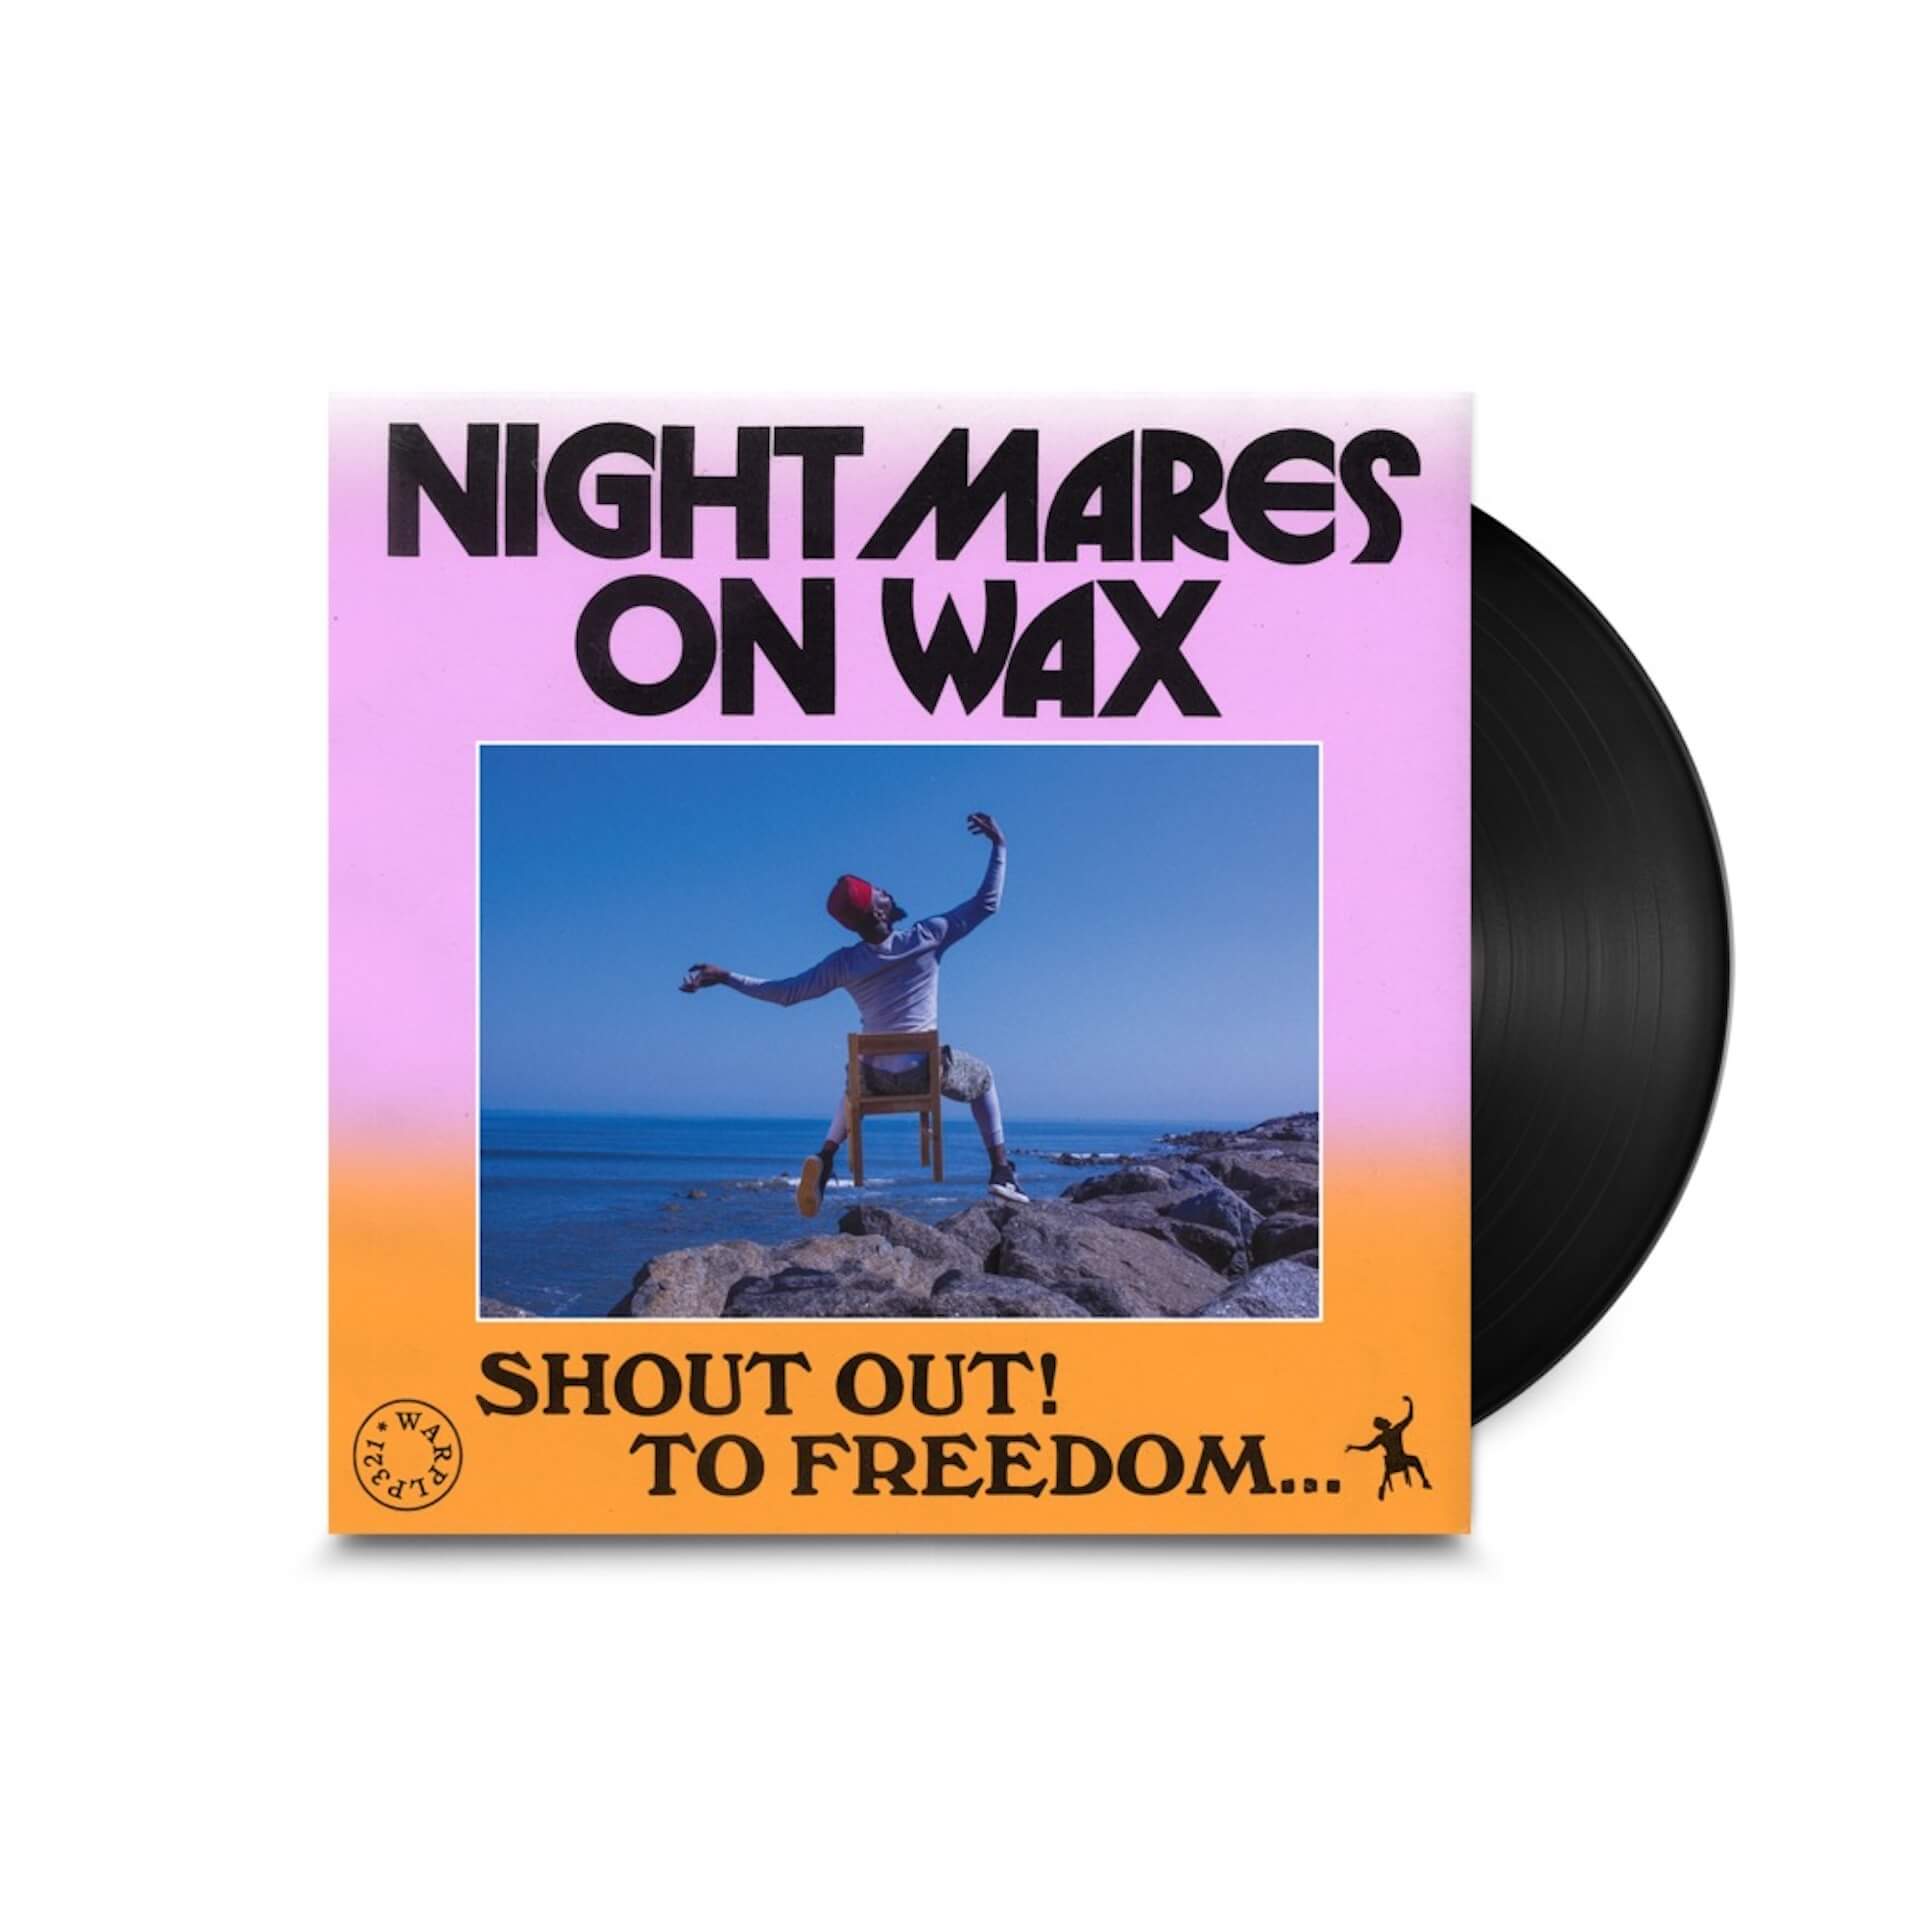 Nightmares On Waxの最新アルバム『SHOUT OUT！ TO FREEDOM…』がリリース決定！ダブルAサイドシングル“Wonder”と“Own Me”も解禁 music210902_now_2